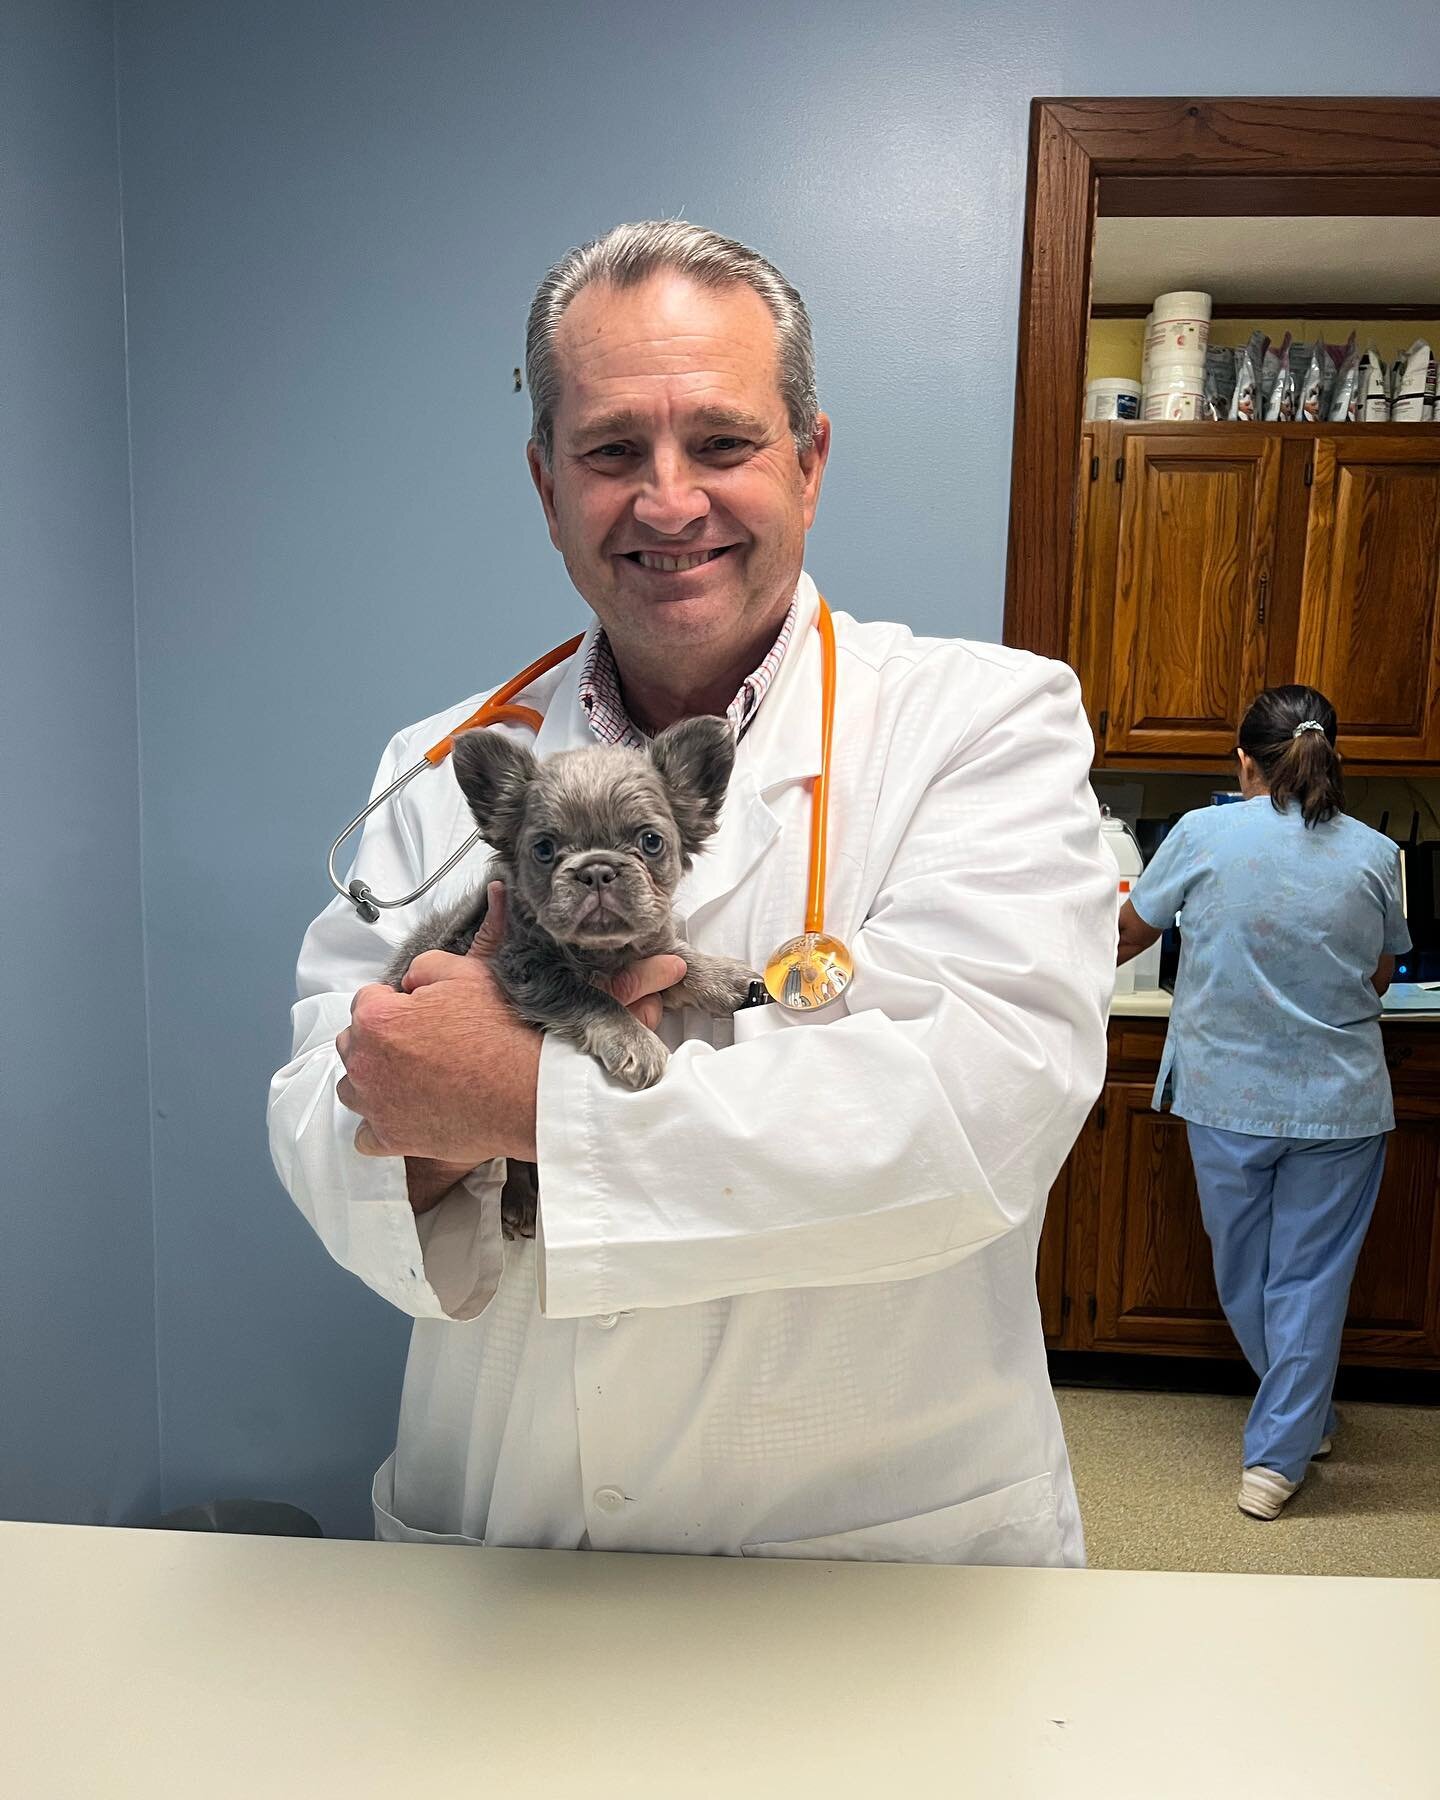 Fluffy comes to conquer rural, city, and beyond💗

Hardest working &amp; dedicated Dr. Mangum holding his first fluffy (ME) in all of 40+ years Vetrinary experience. Dr. Mangum graduated at the top of his classes and devotes his entire life to caring